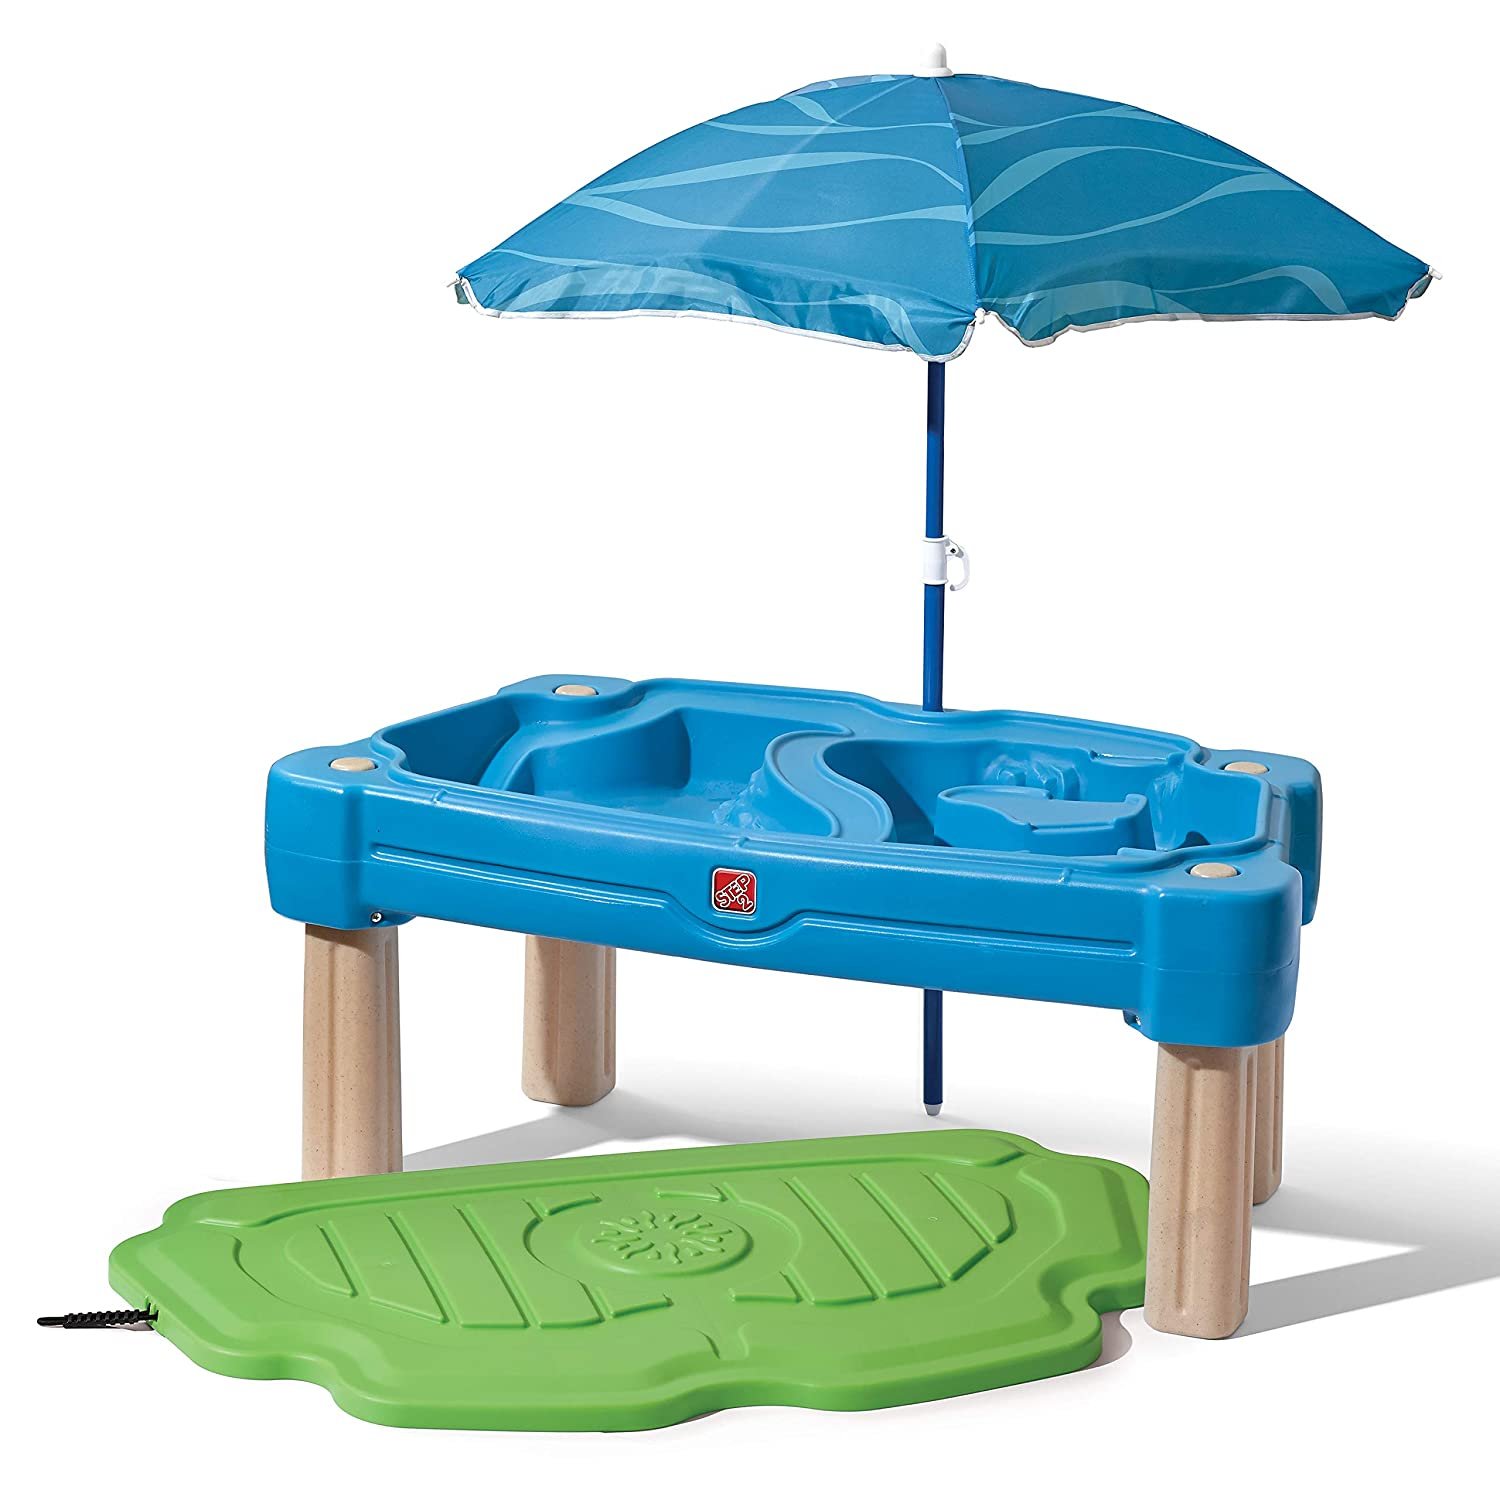 5. Step2 Cascading Cove Sand & Water Table with Umbrella 